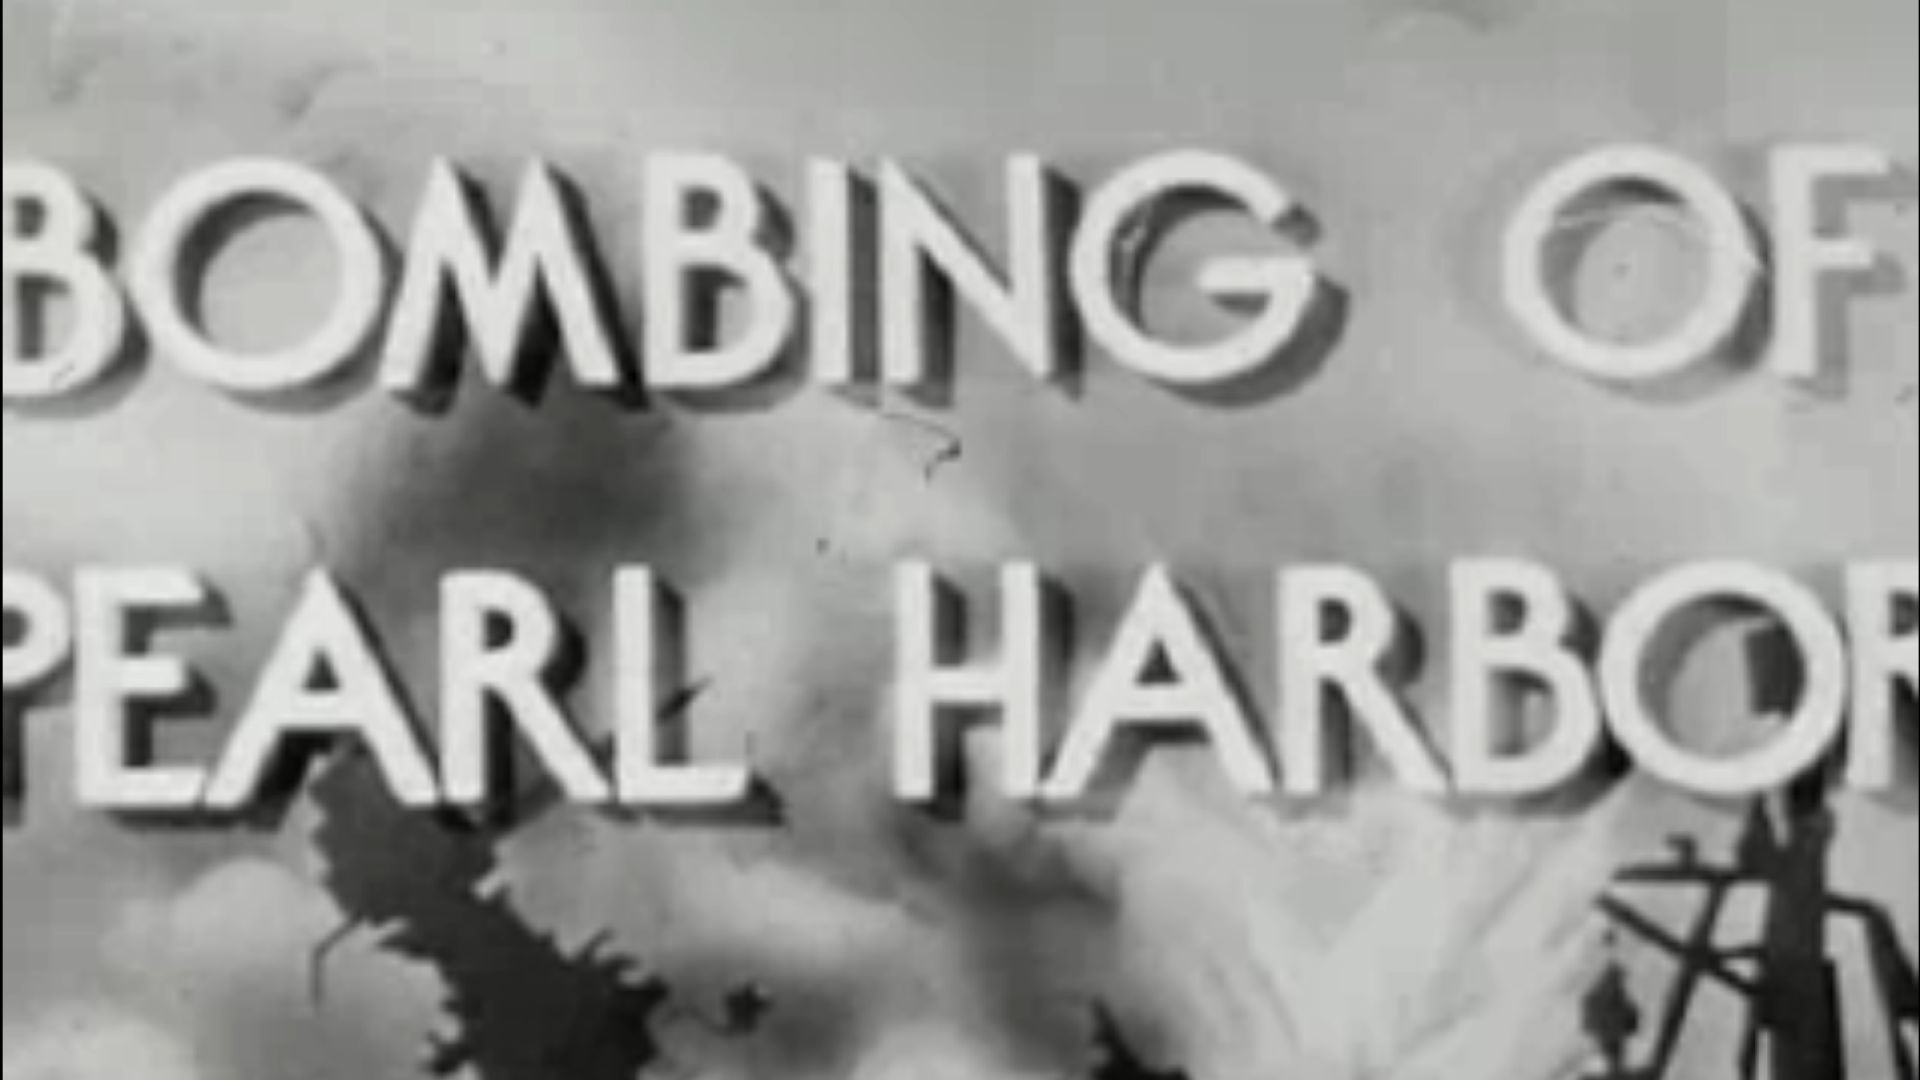 News Parade: Bombing of Pearl Harbor (1942)